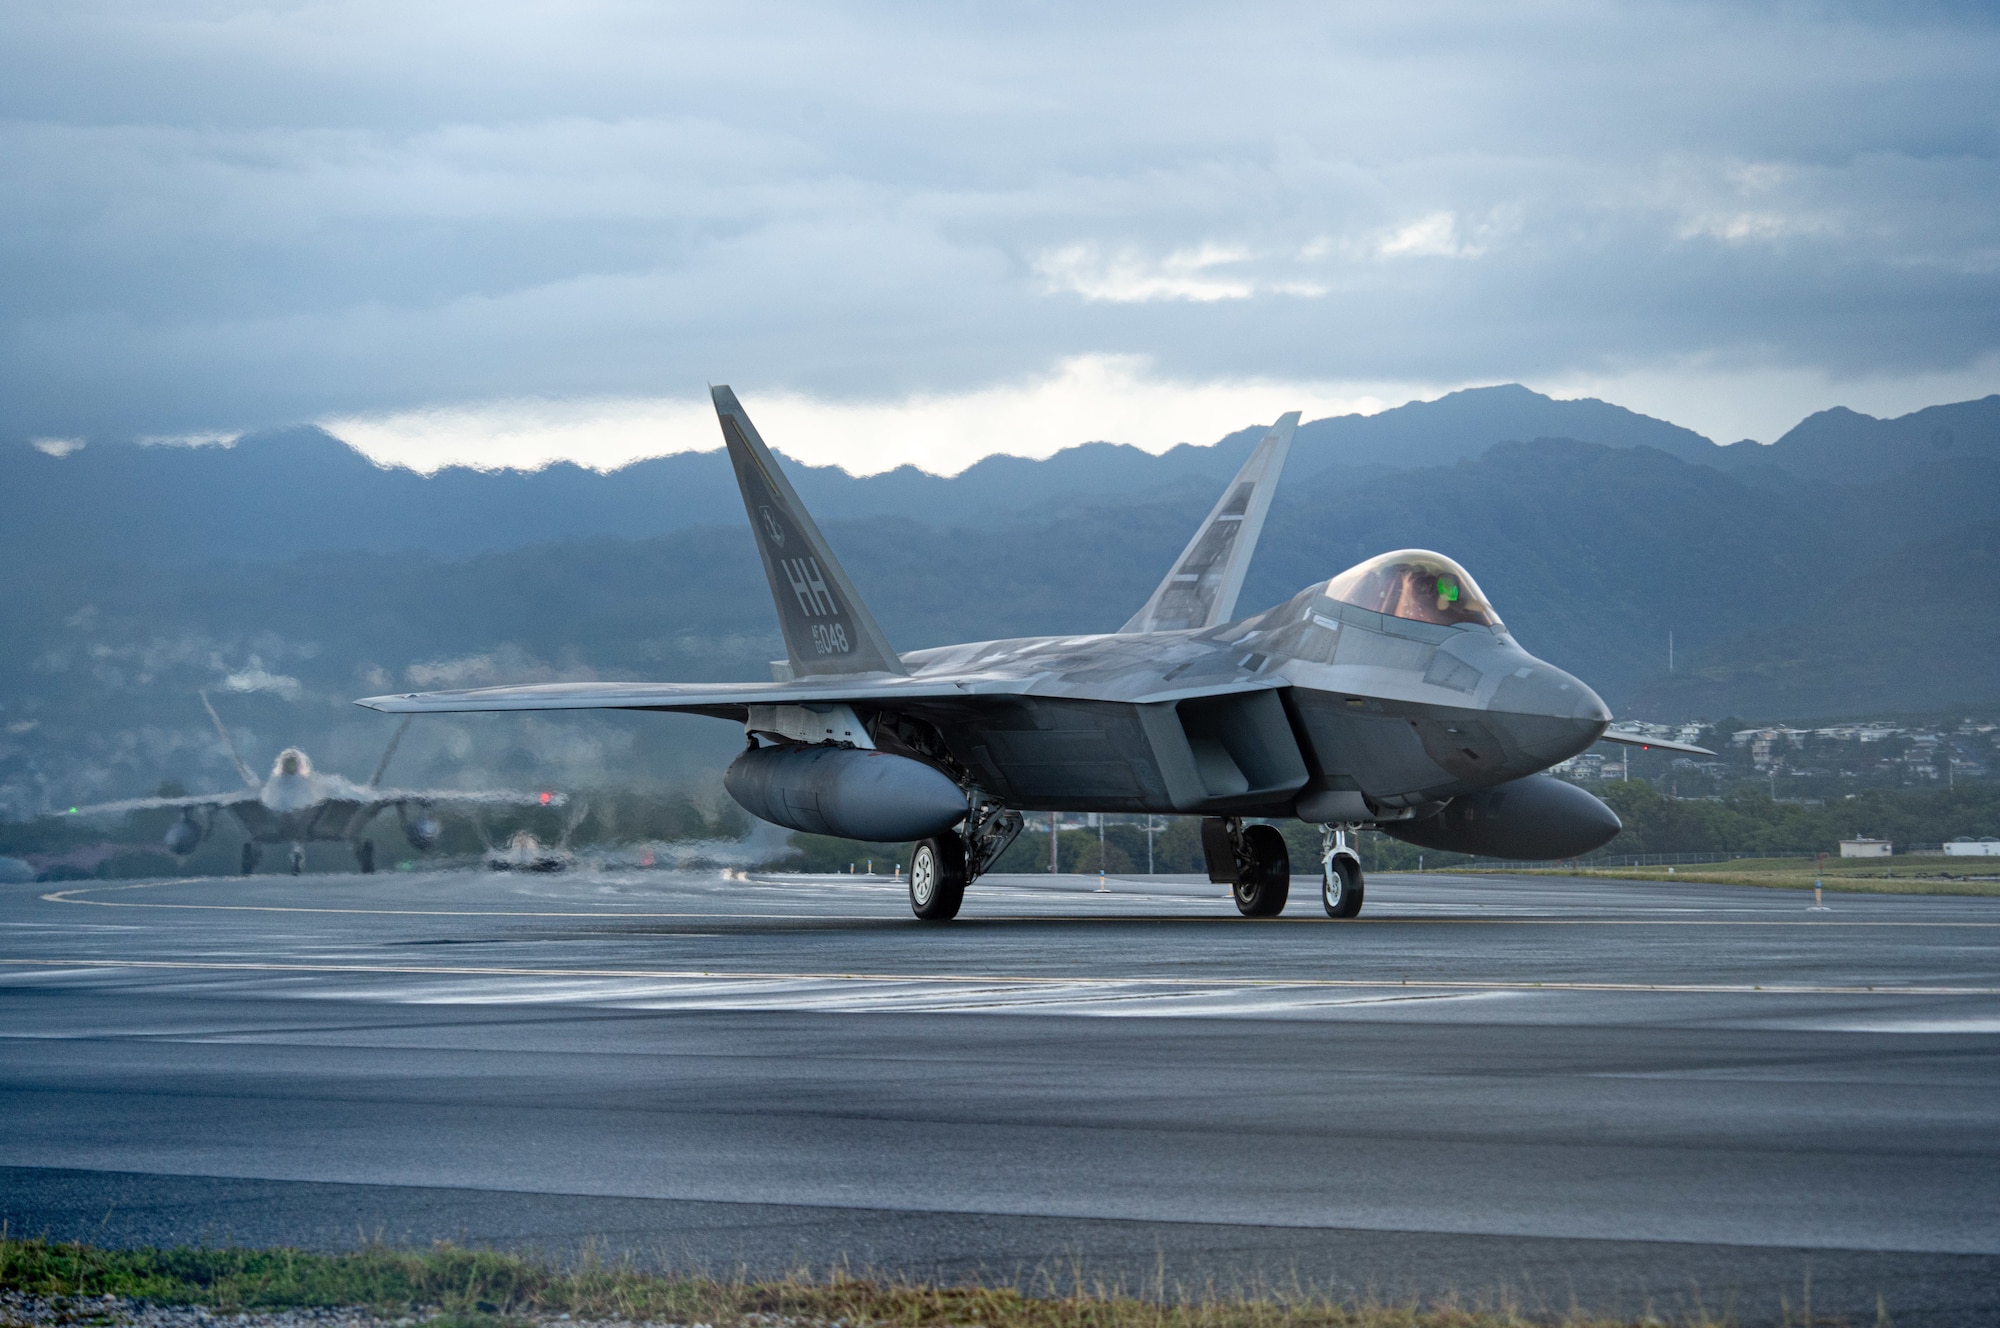 A Hawaii Air National Guard F-22 Raptor taxis March 11, 2021 at Honolulu International Airport, Hawaii. The Raptor flew alongside F-16 Fighting Falcons from Eielson Air Force Base, Alaska, during a final training sortie for exercise Pacific Raptor.